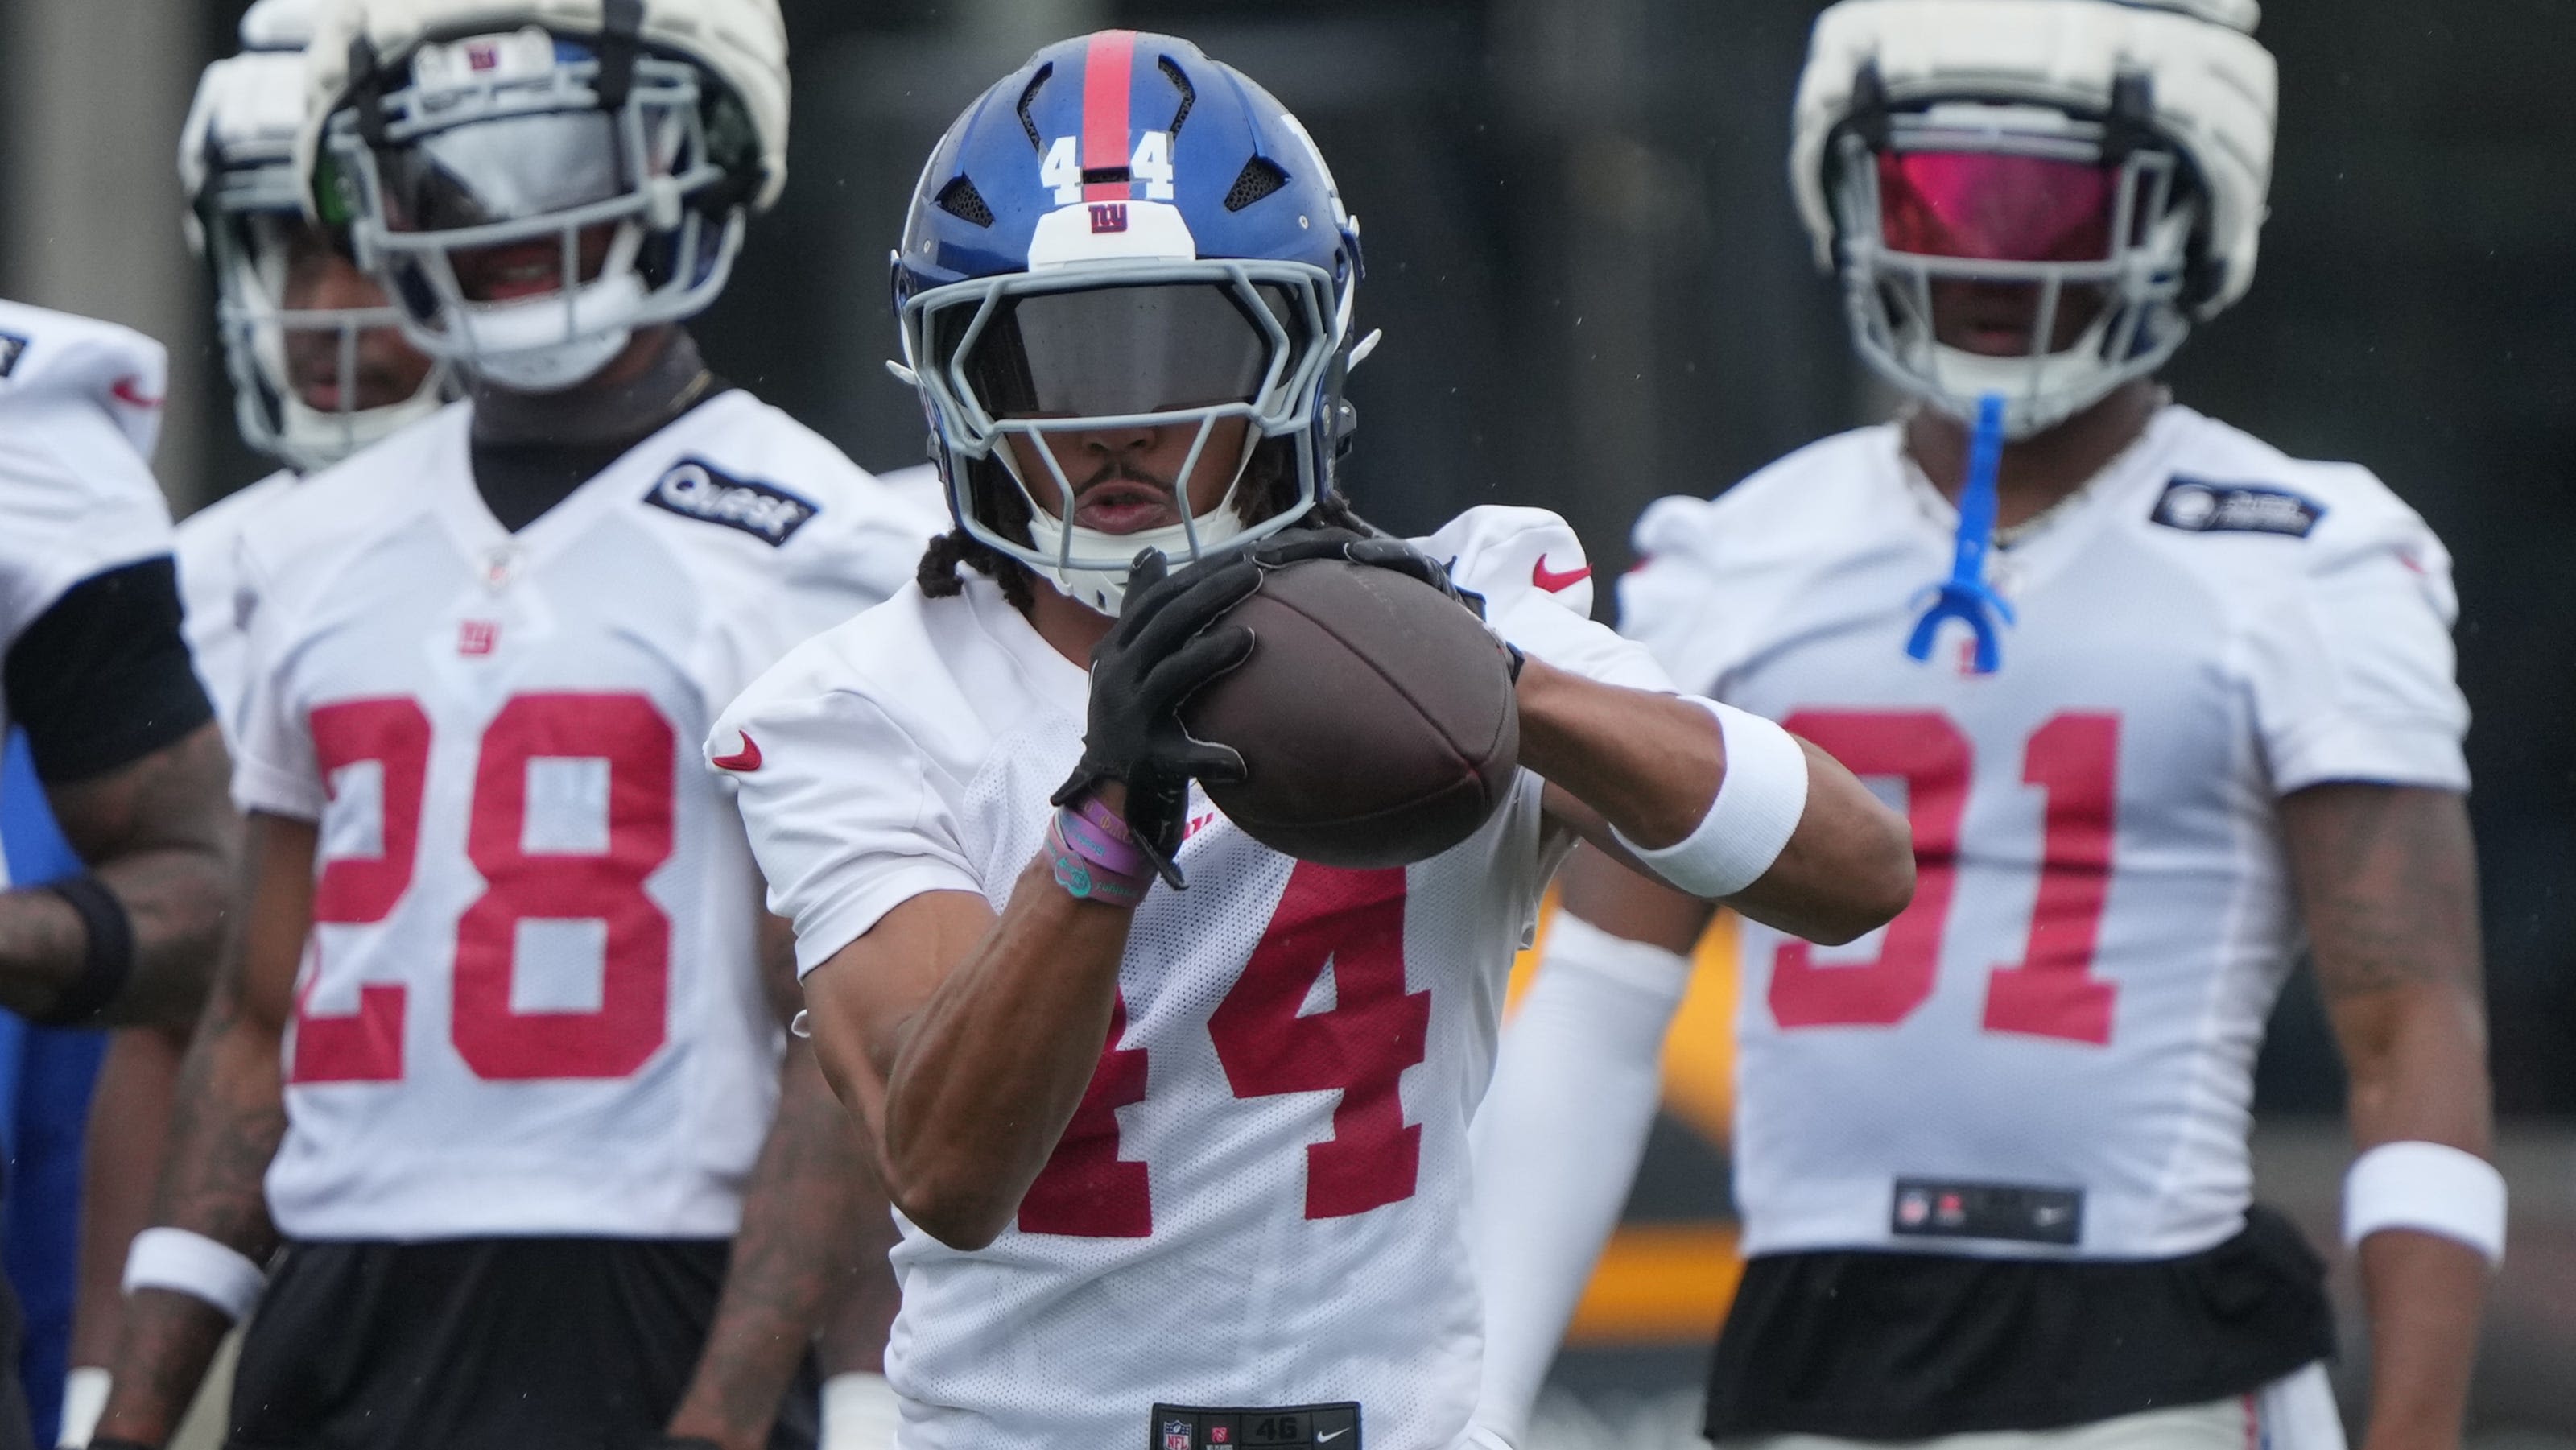 NY Giants' bubble busters: These players have made strong roster pushes at start of camp